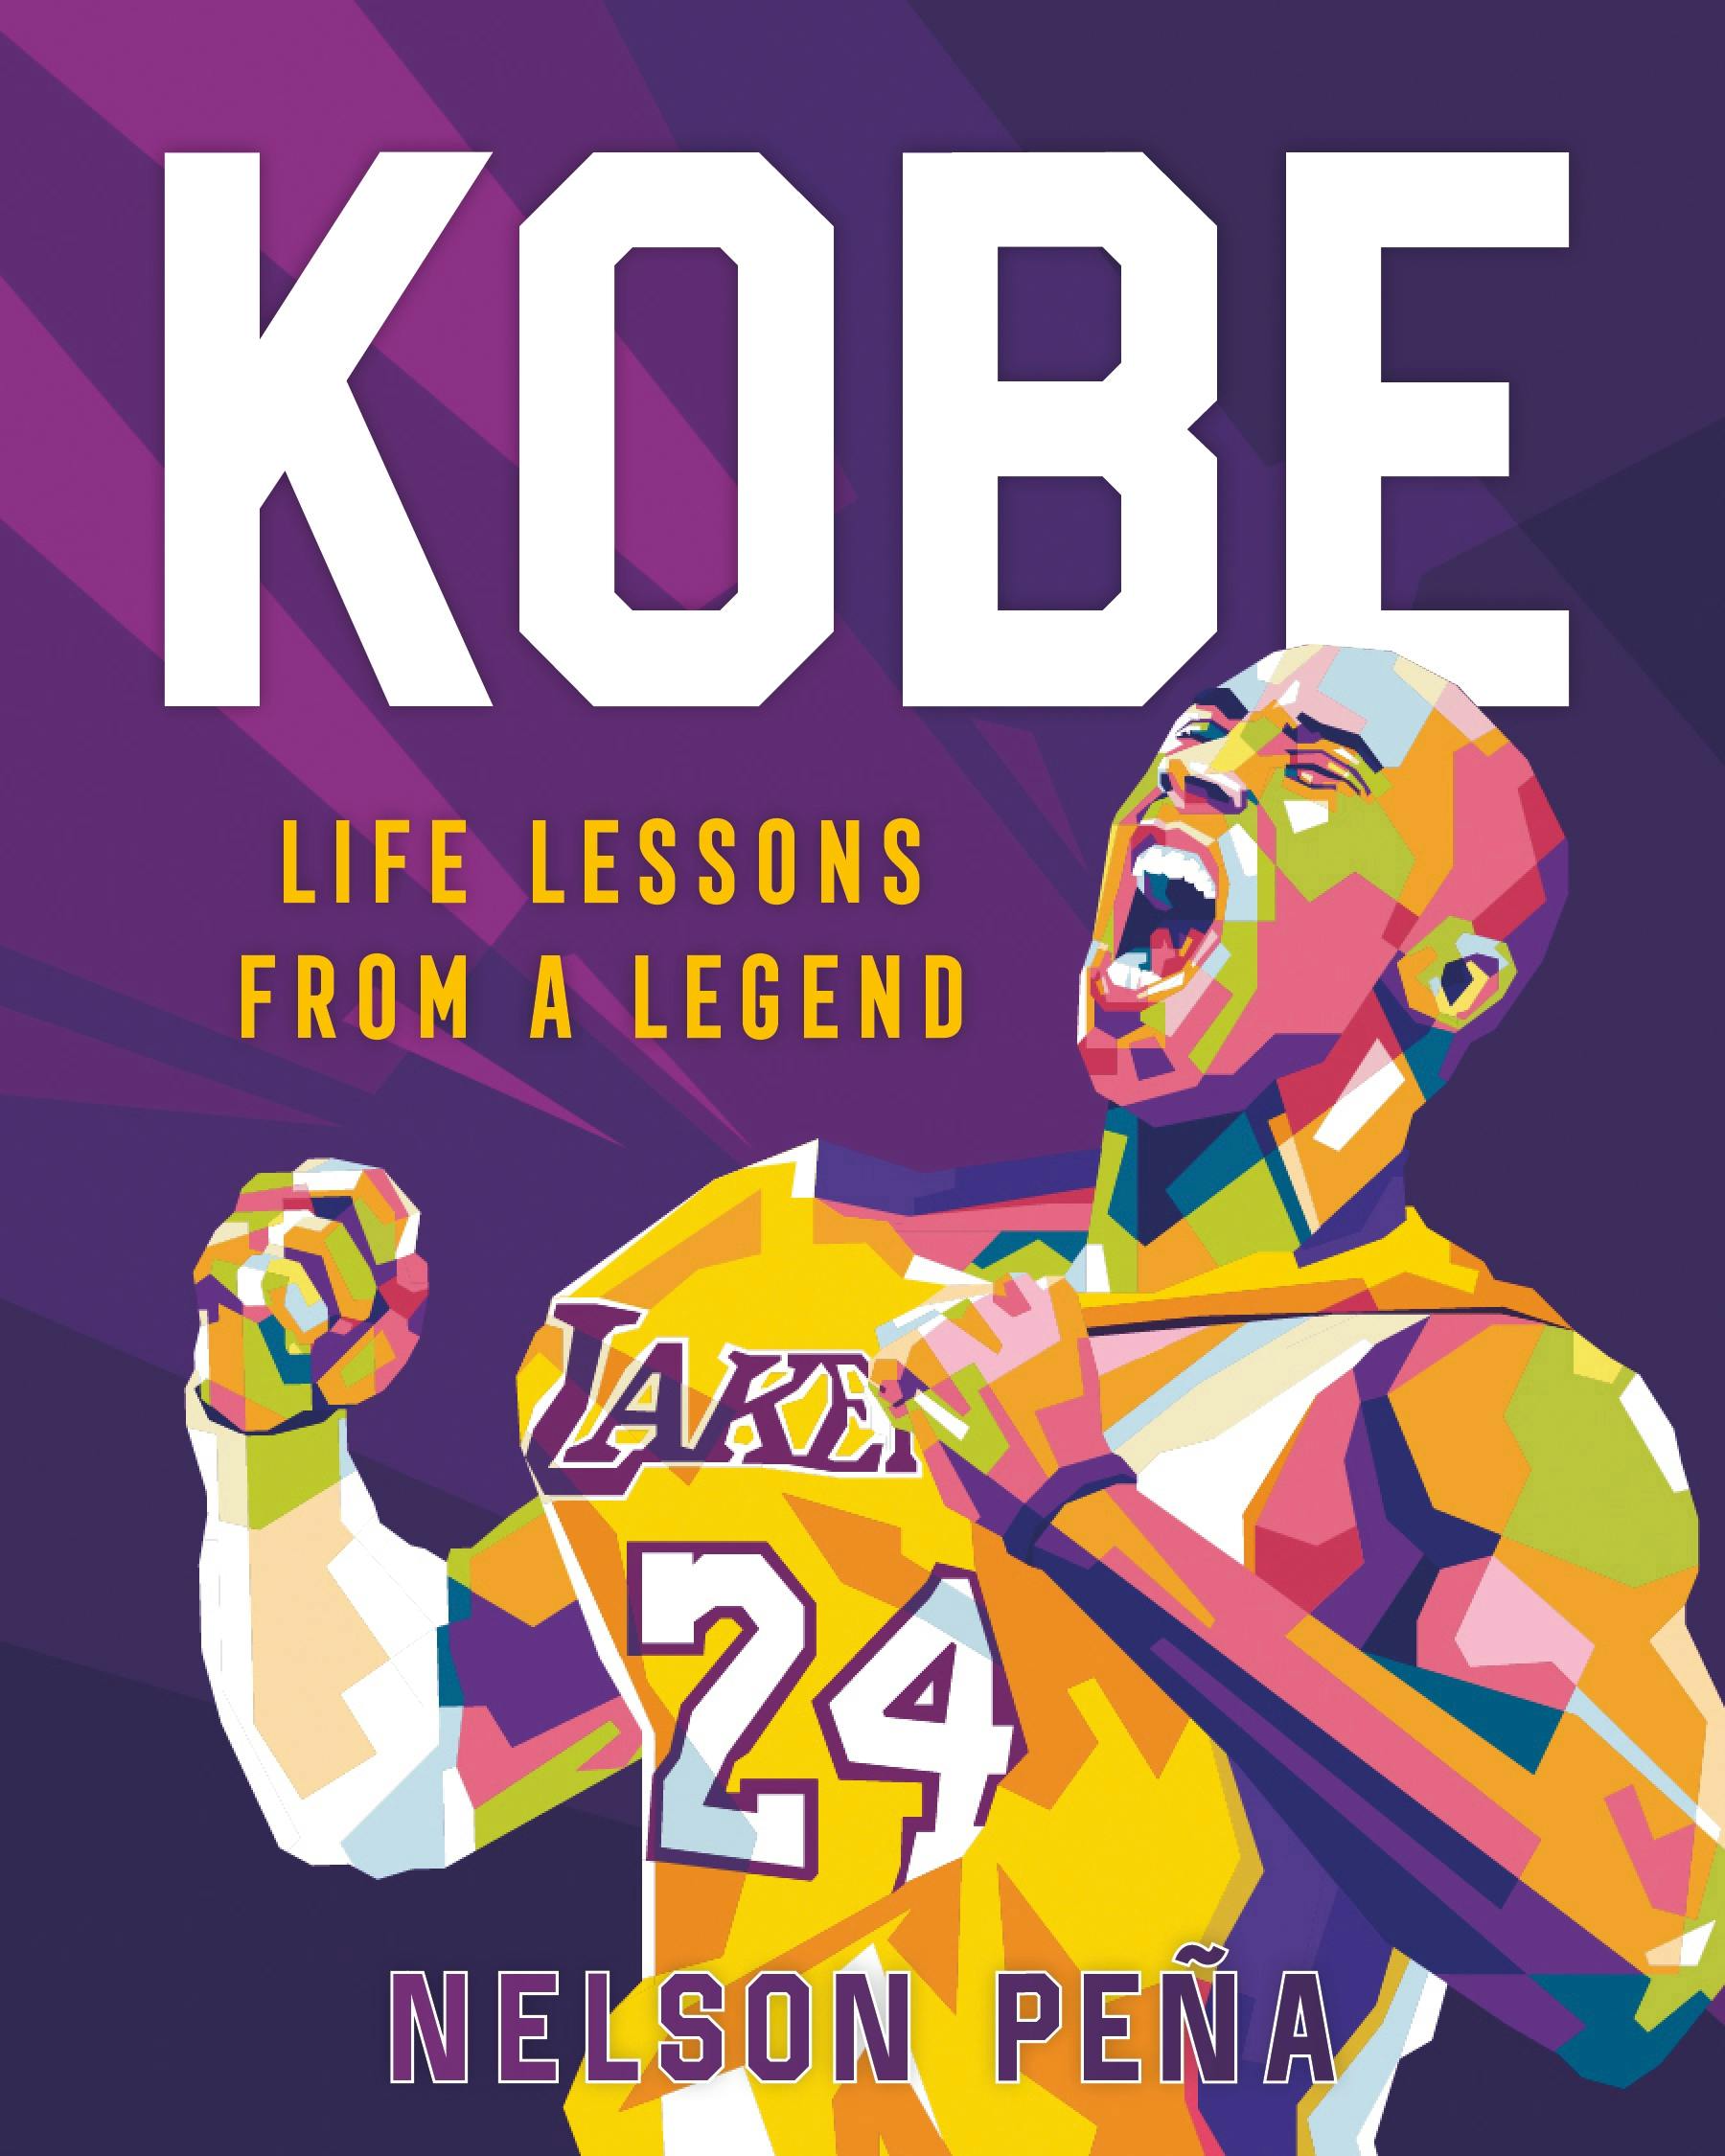 Kobe Bryant Photos: Life in Pictures